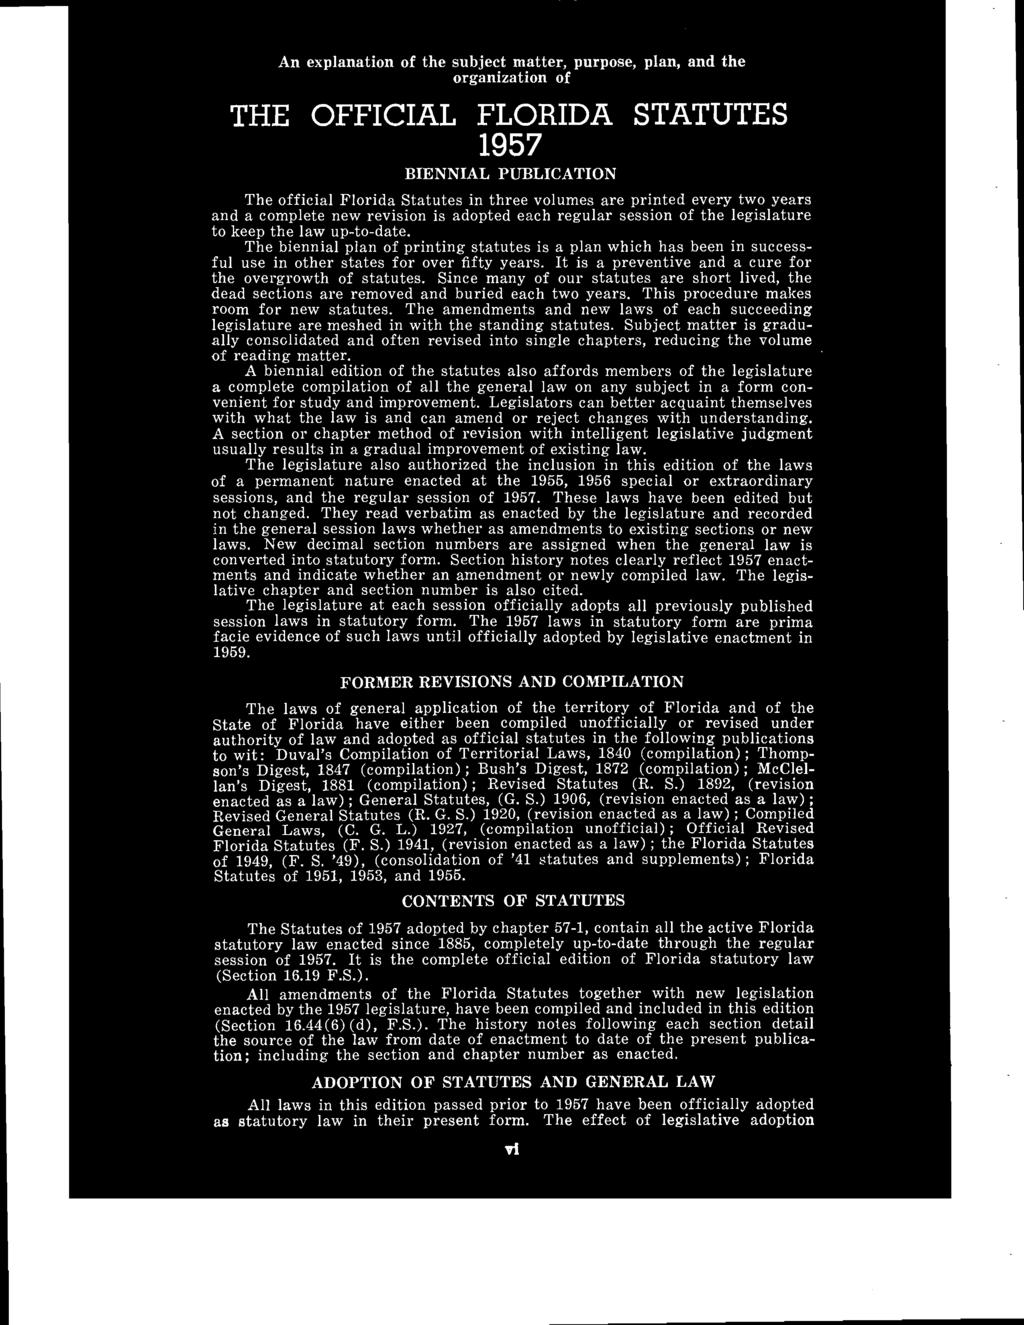 An explanation of the subject matter, purpose, plan, and the organization of THE OFFICIAL FLORIDA STATUTES 1957 BIENNIAL PUBLICATION The official Florida Statutes in three volumes are printed every